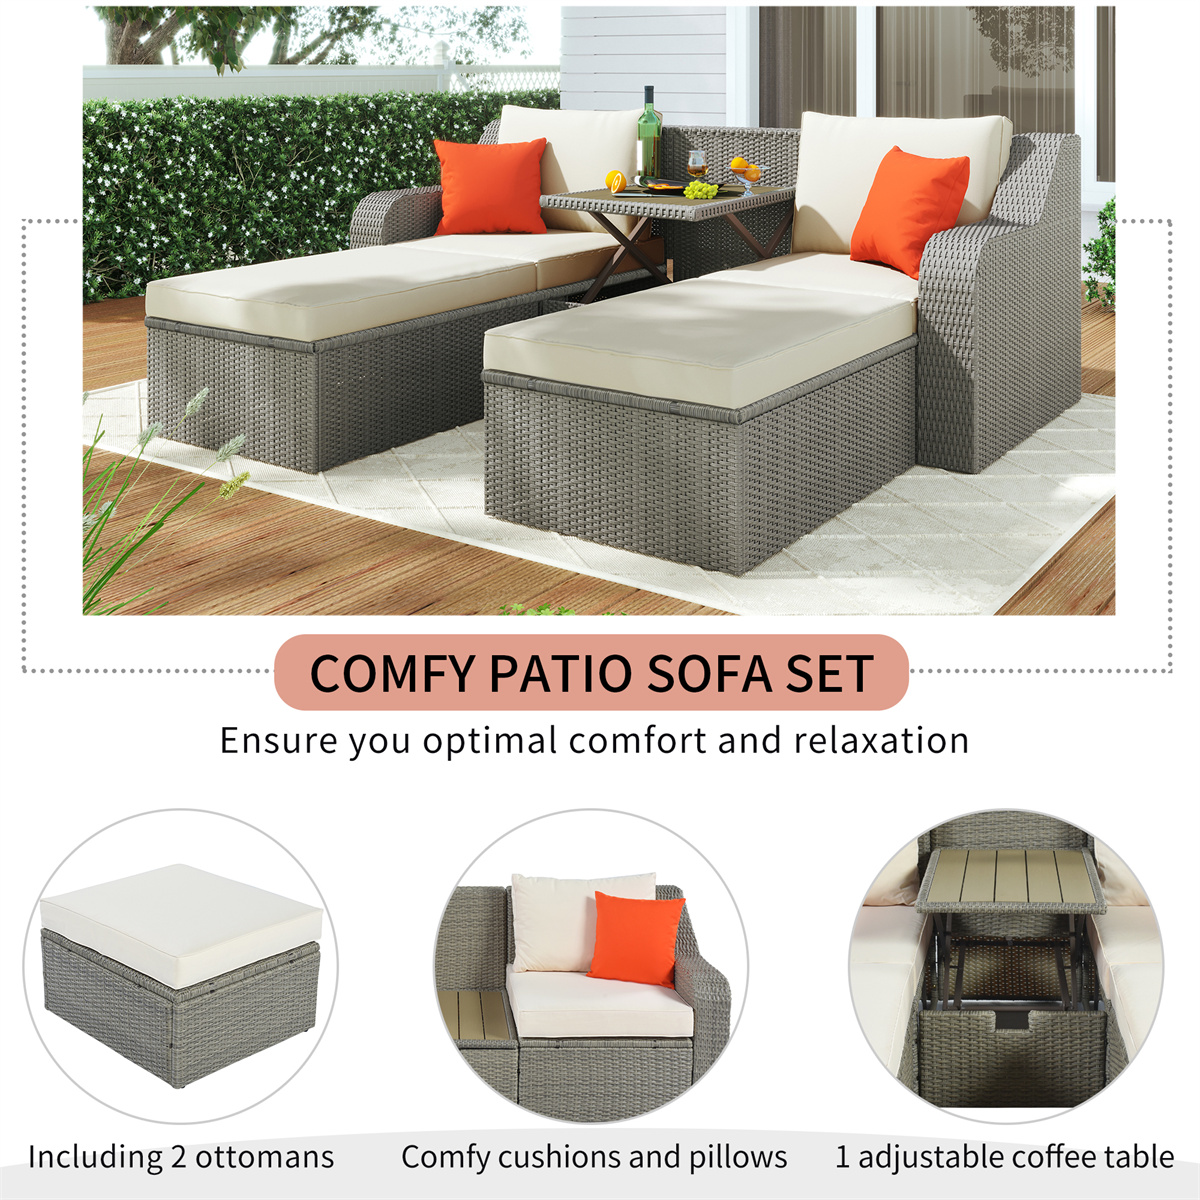 ARCTICSCORPION Patio Wicker Furniture Set,3-Piece Sectional Wicker Sofa with Cushions,Pillows,Ottomans and Lift Top Coffee Table,Outdoor Lounge Chair Conversation Set for Garden Backyard Deck,Beige - image 3 of 7